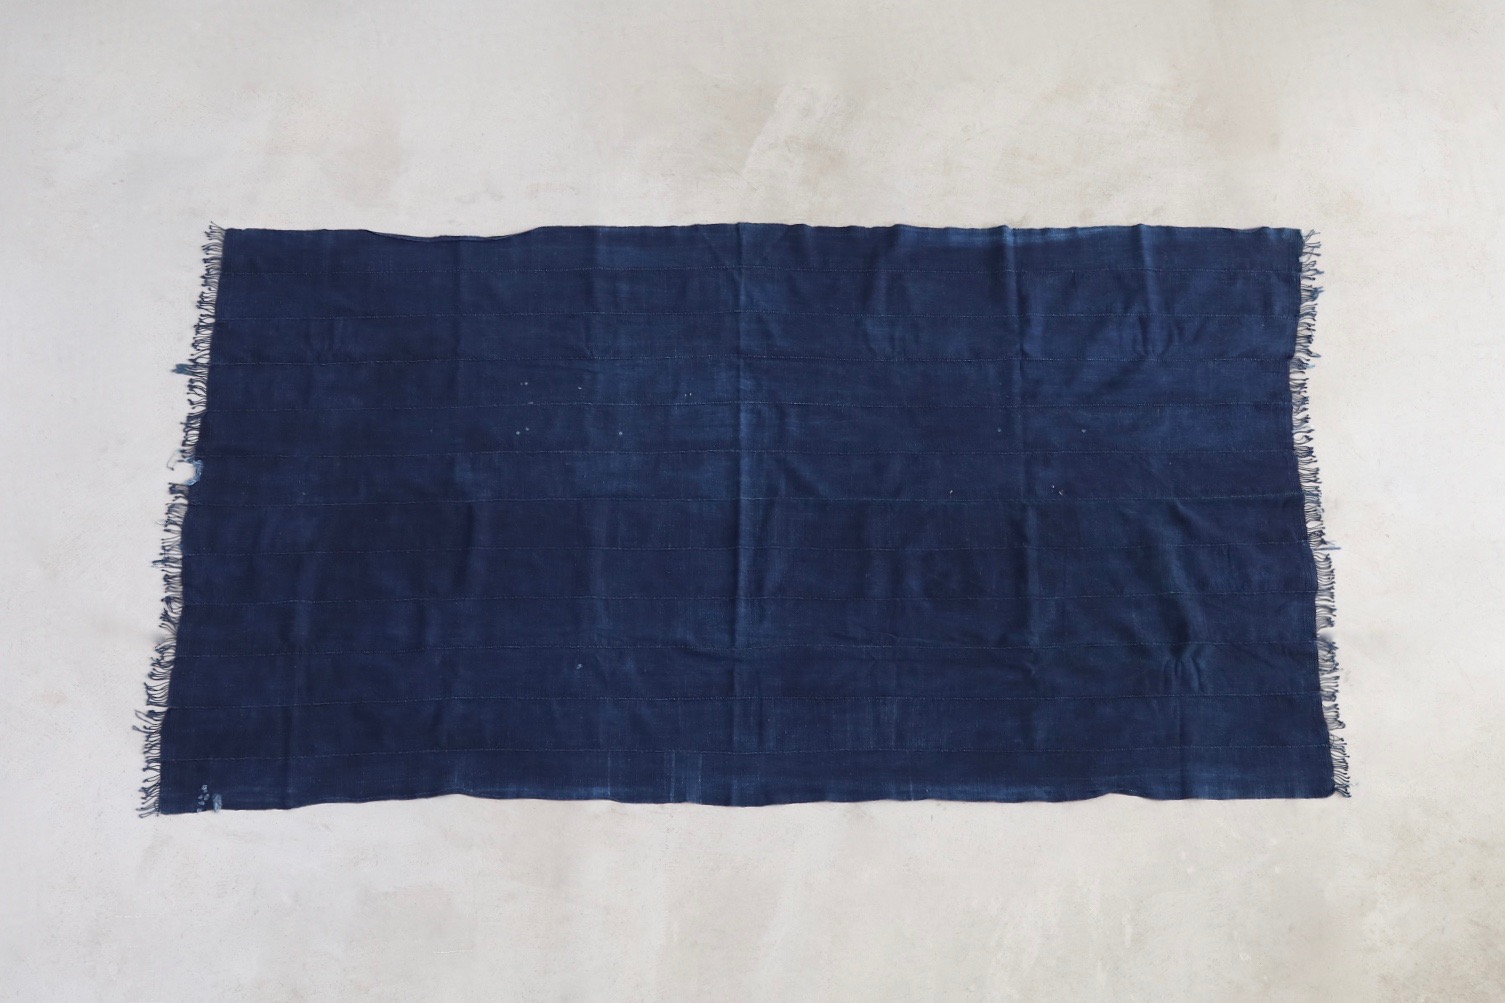 An Introduction to the Indigo Dye Styles of Western Africa